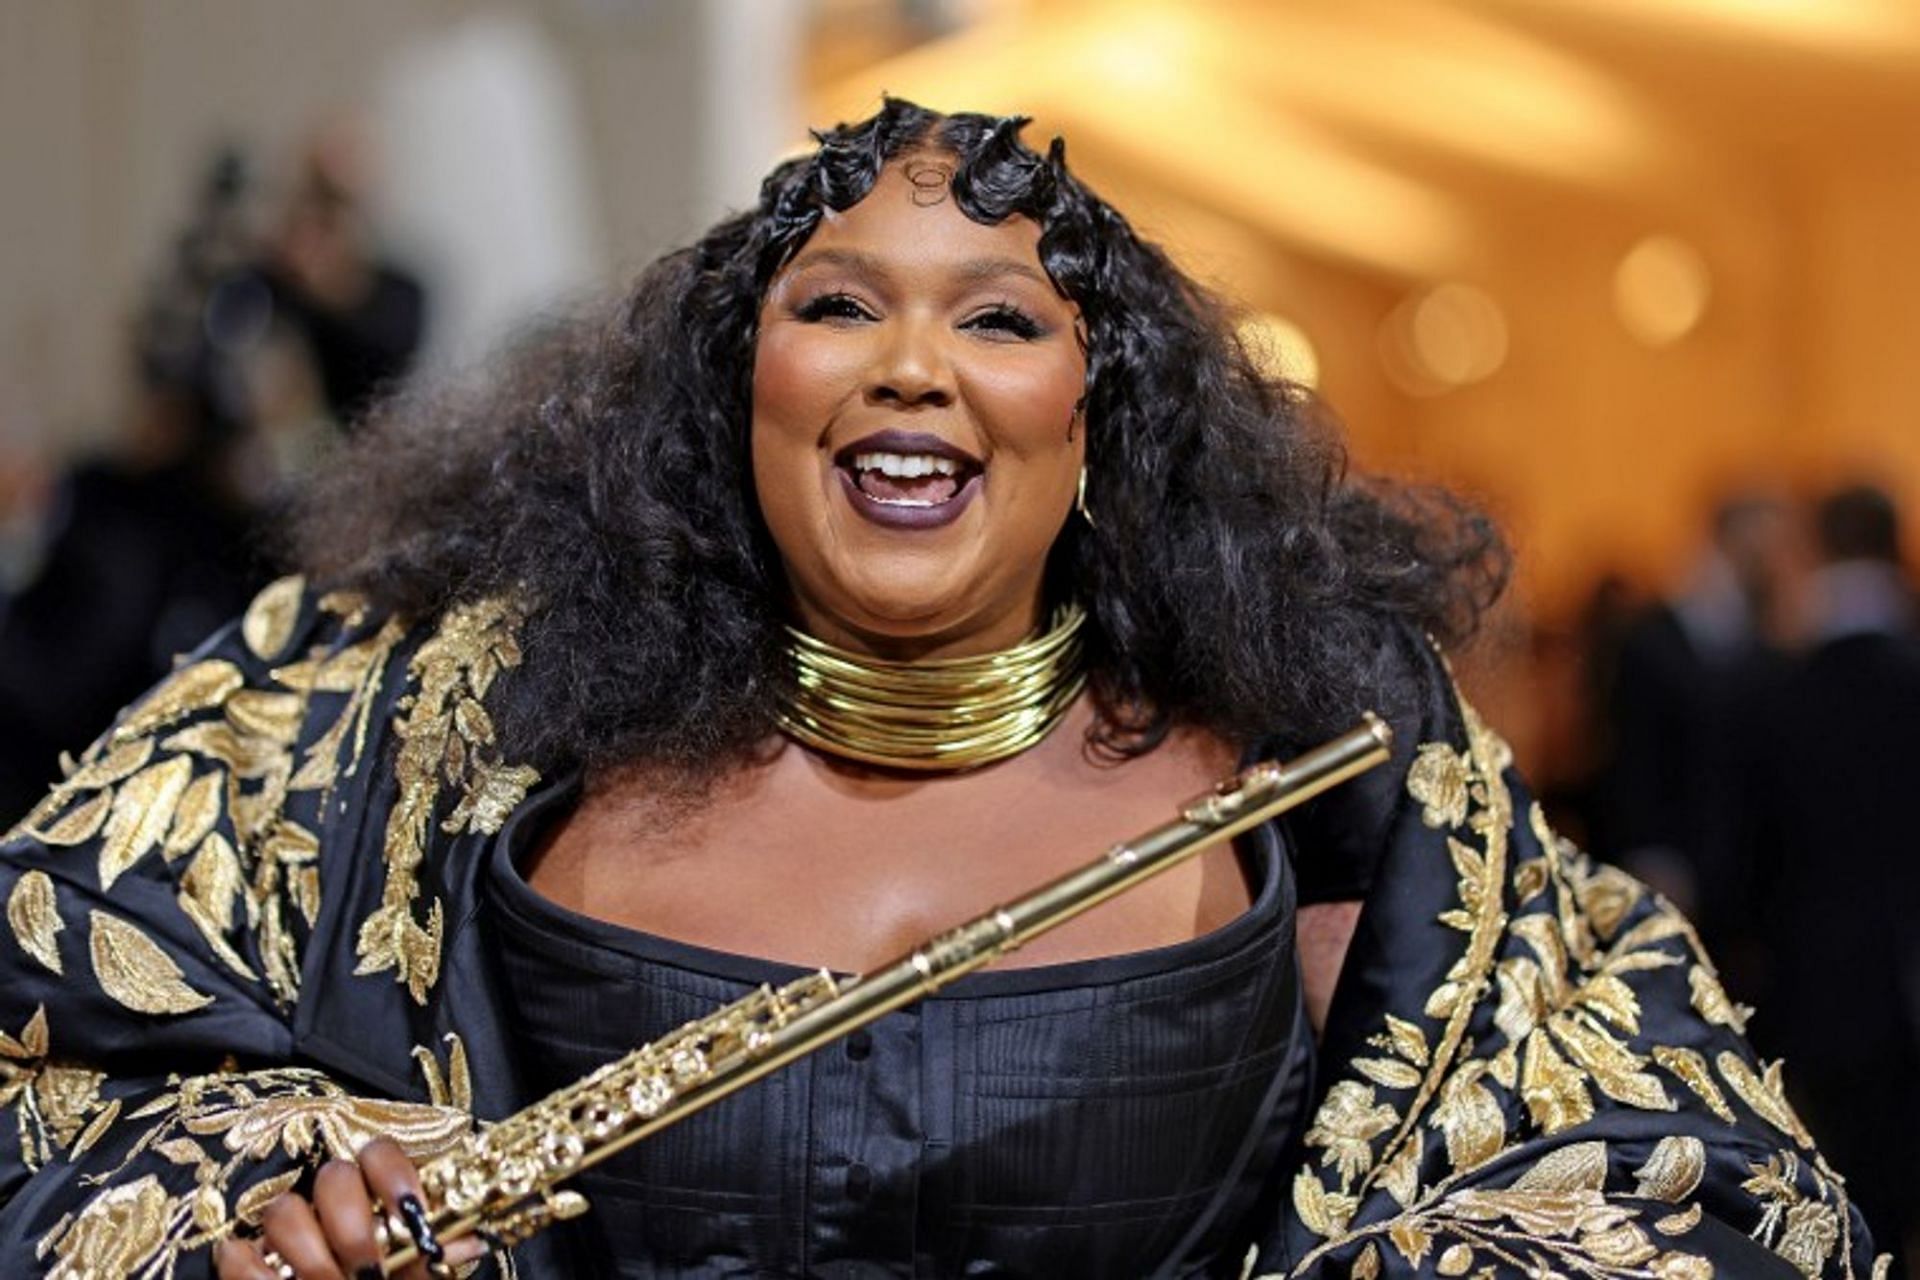 Fans demand Lizzo to &quot;remove&quot; Grrrls track following usage of ableist slur (Image via Getty Images)